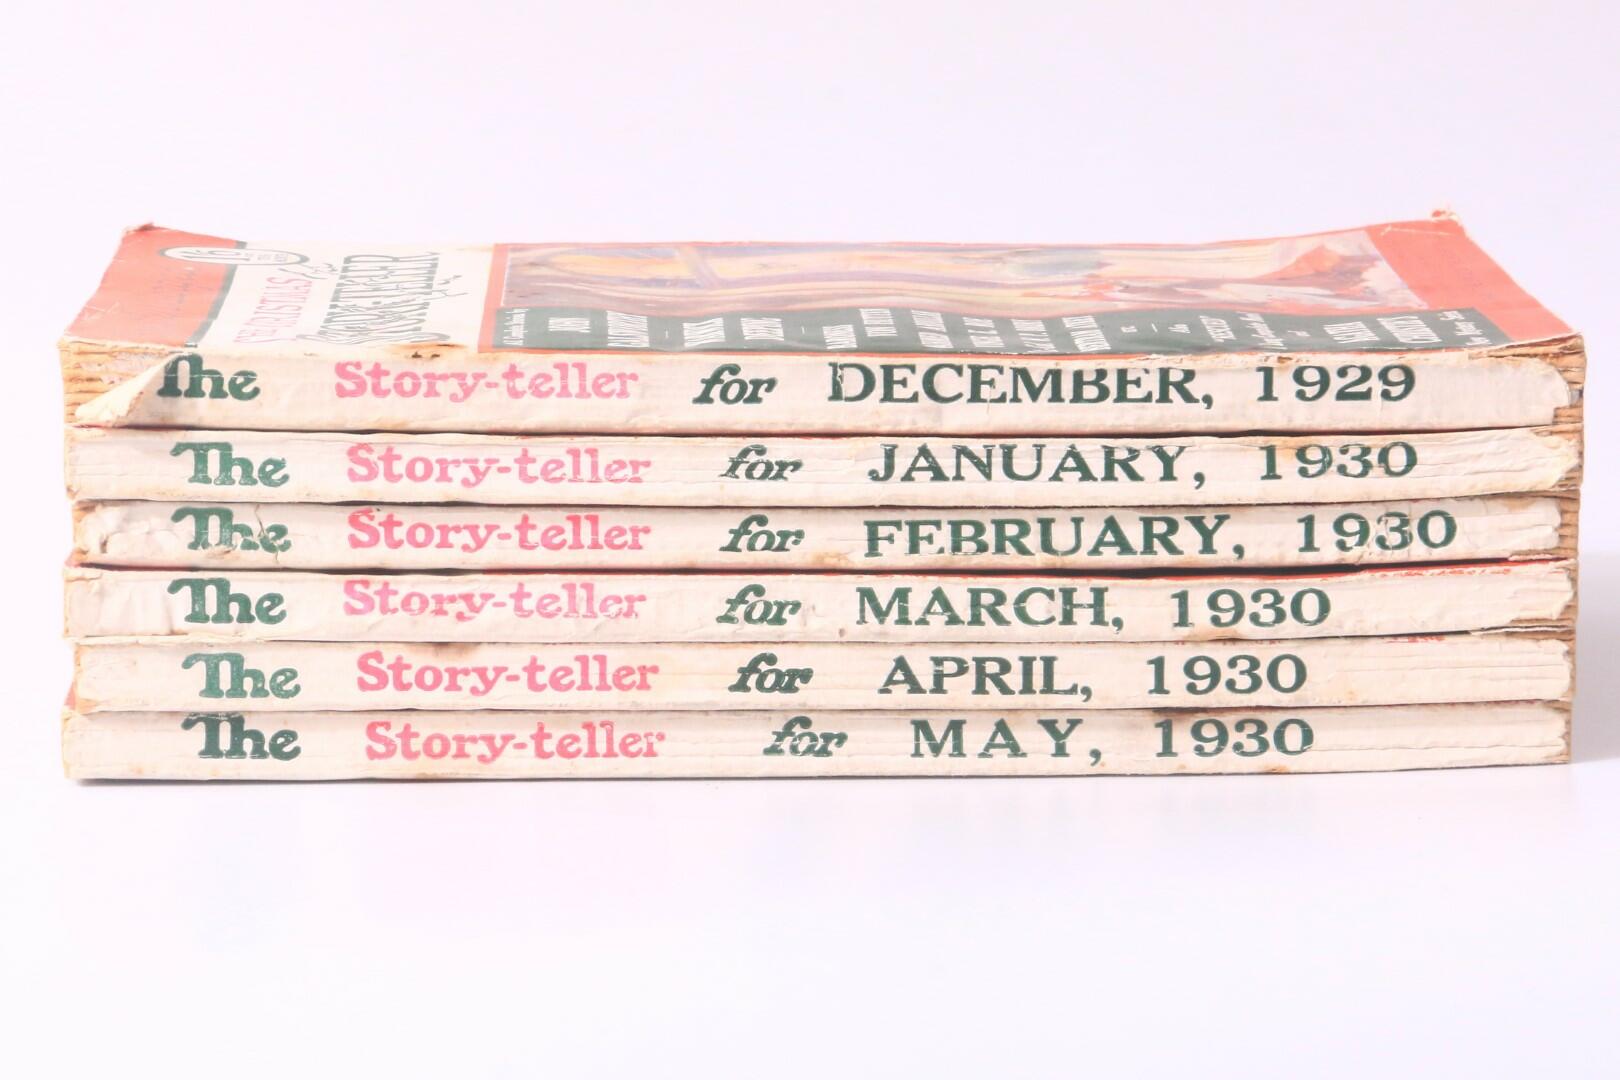 Agatha Christie [and others] - Six Issues of The Story-Teller [containing] Six Miss Marple Stories - Amalgamated Press, 1929-1930, First Edition.